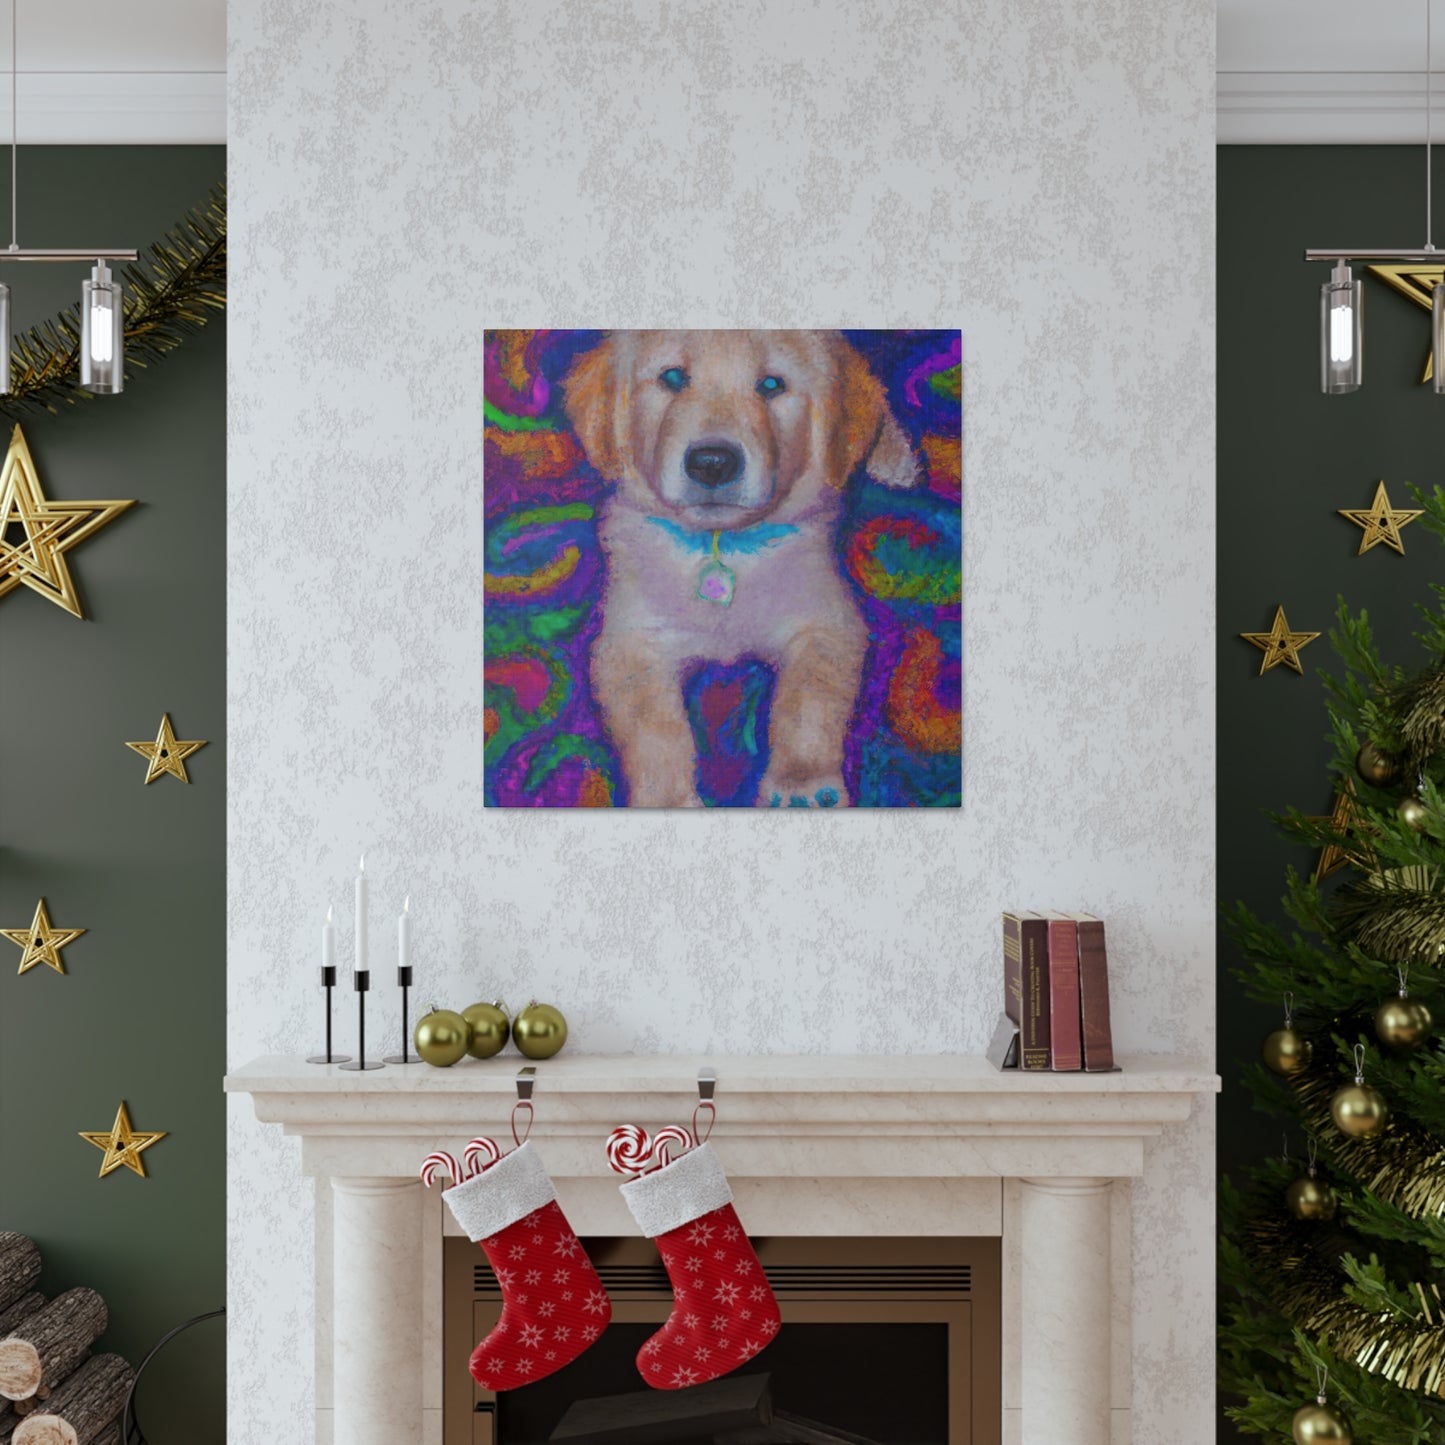 Lord Fausto Hopecliff - Golden Retriever Puppy - Canvas